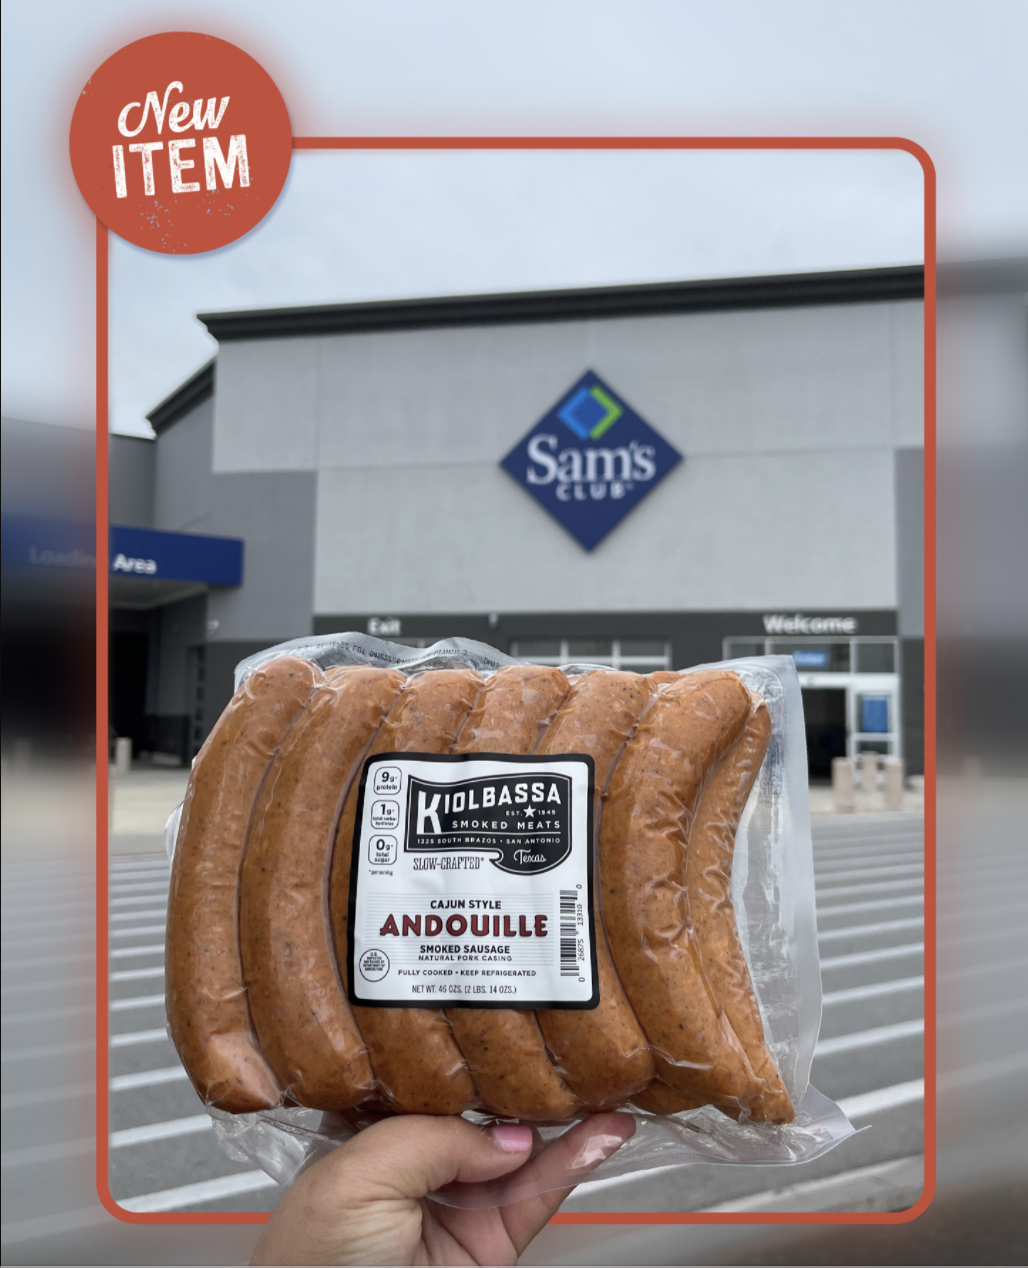 BREAKING NEWS: Cajun Style Andouille is now available! 